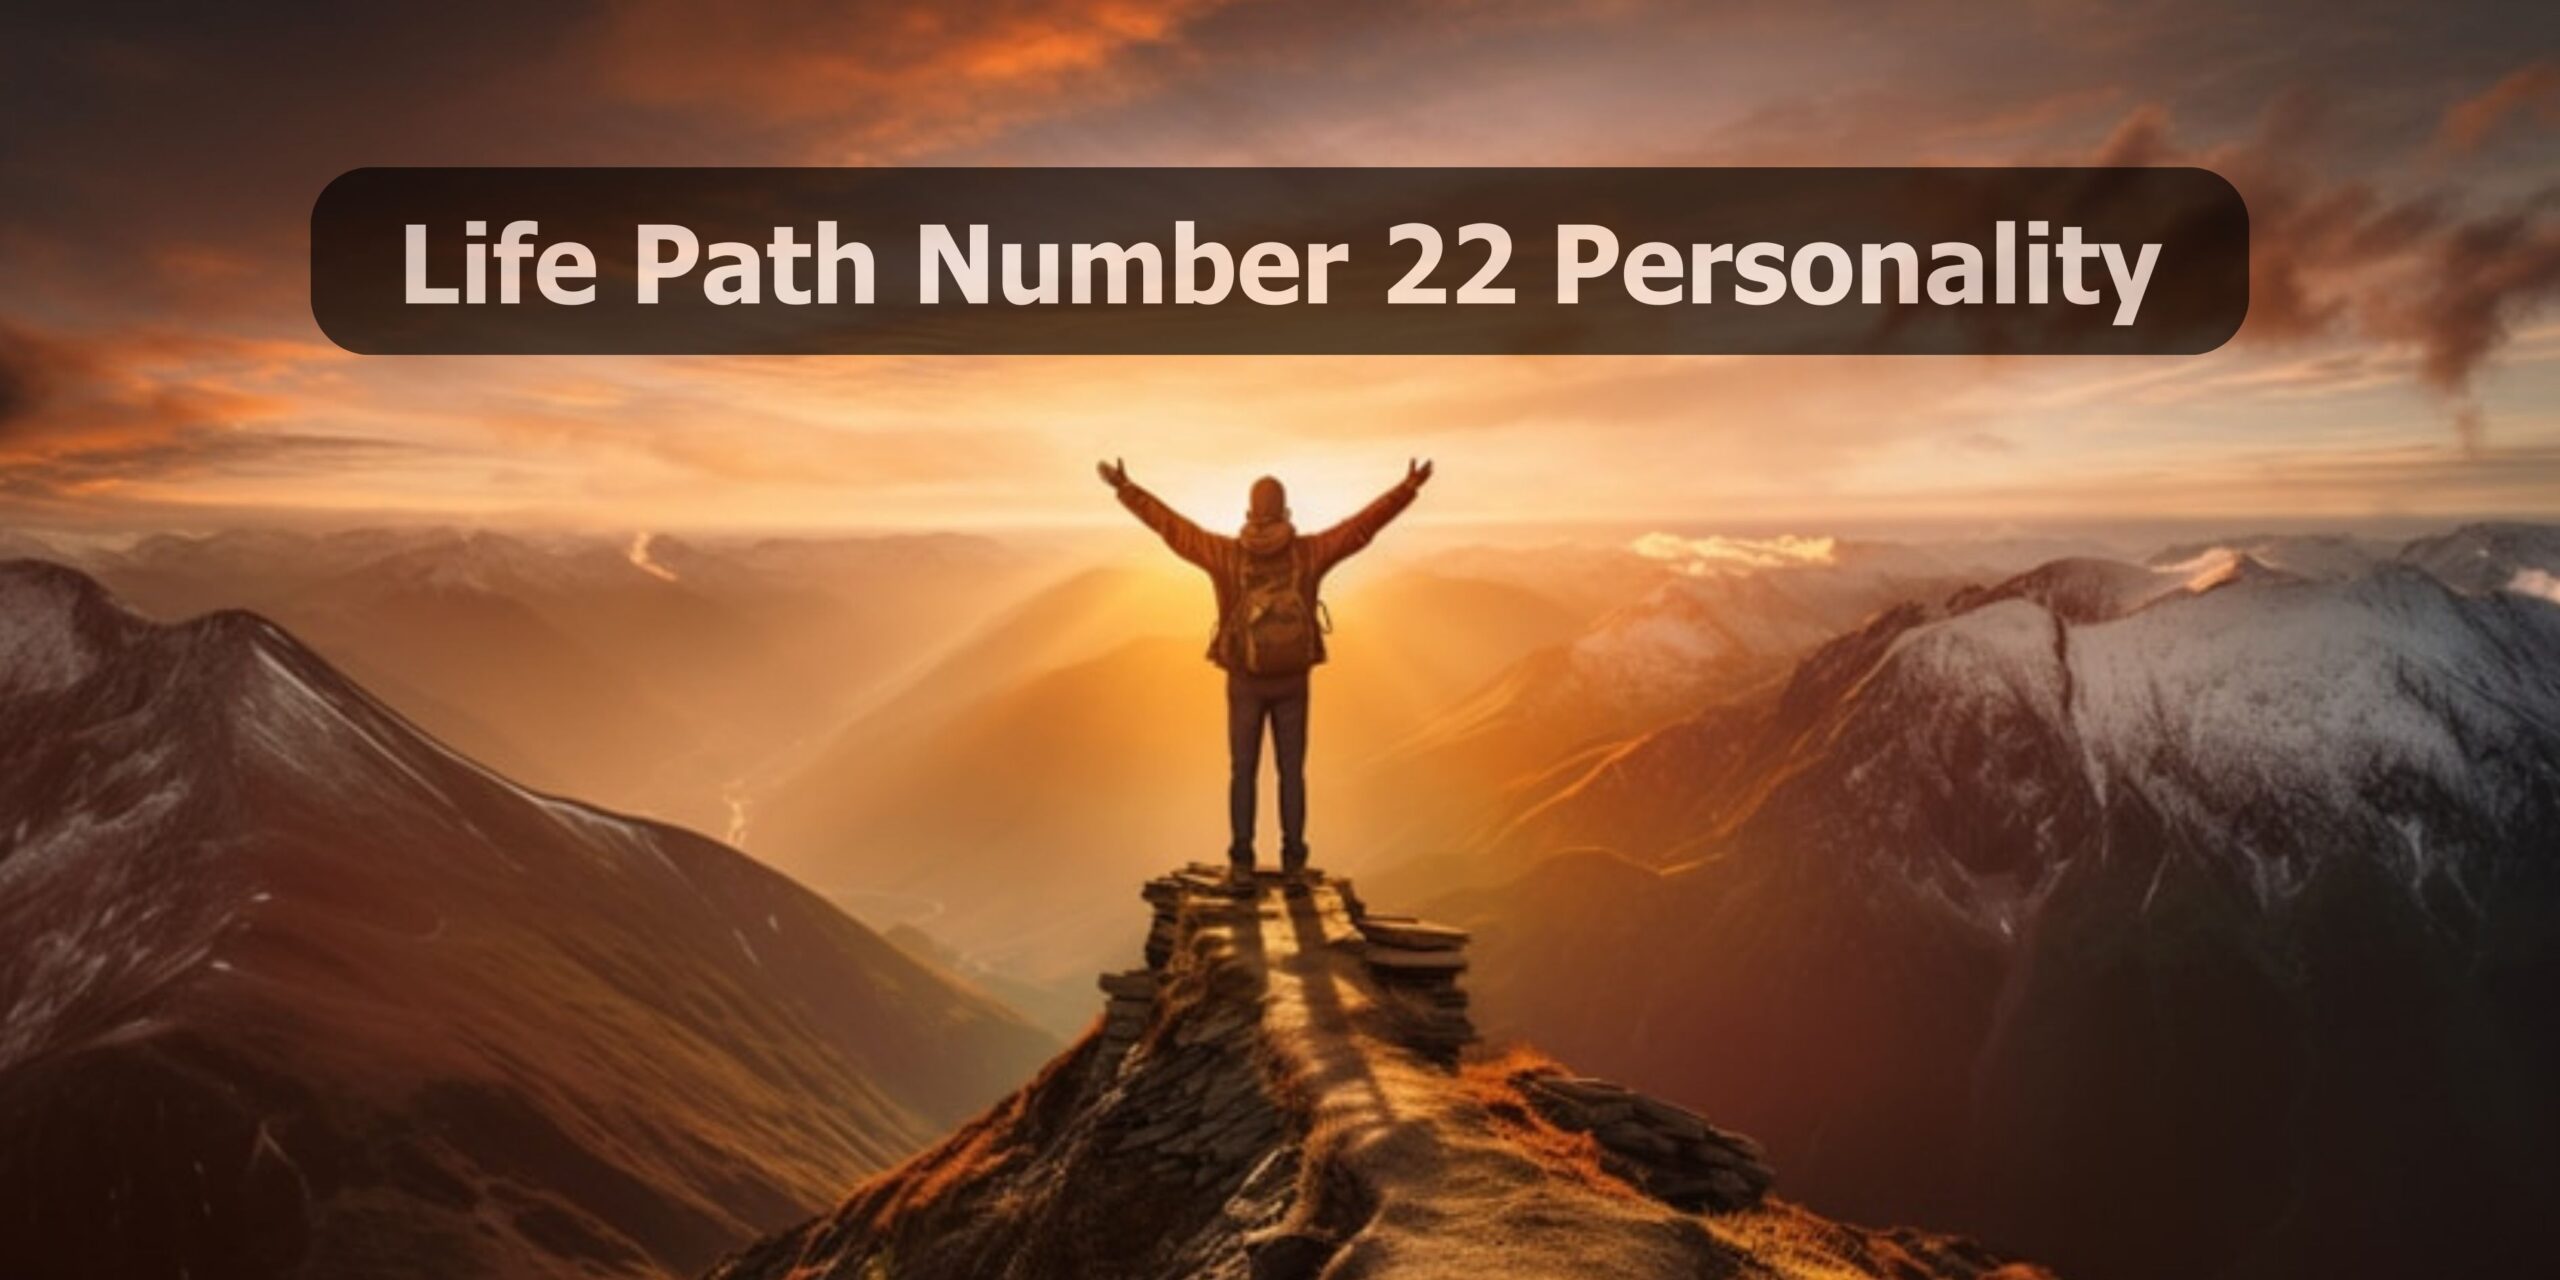 Life Path Number 22 Personality